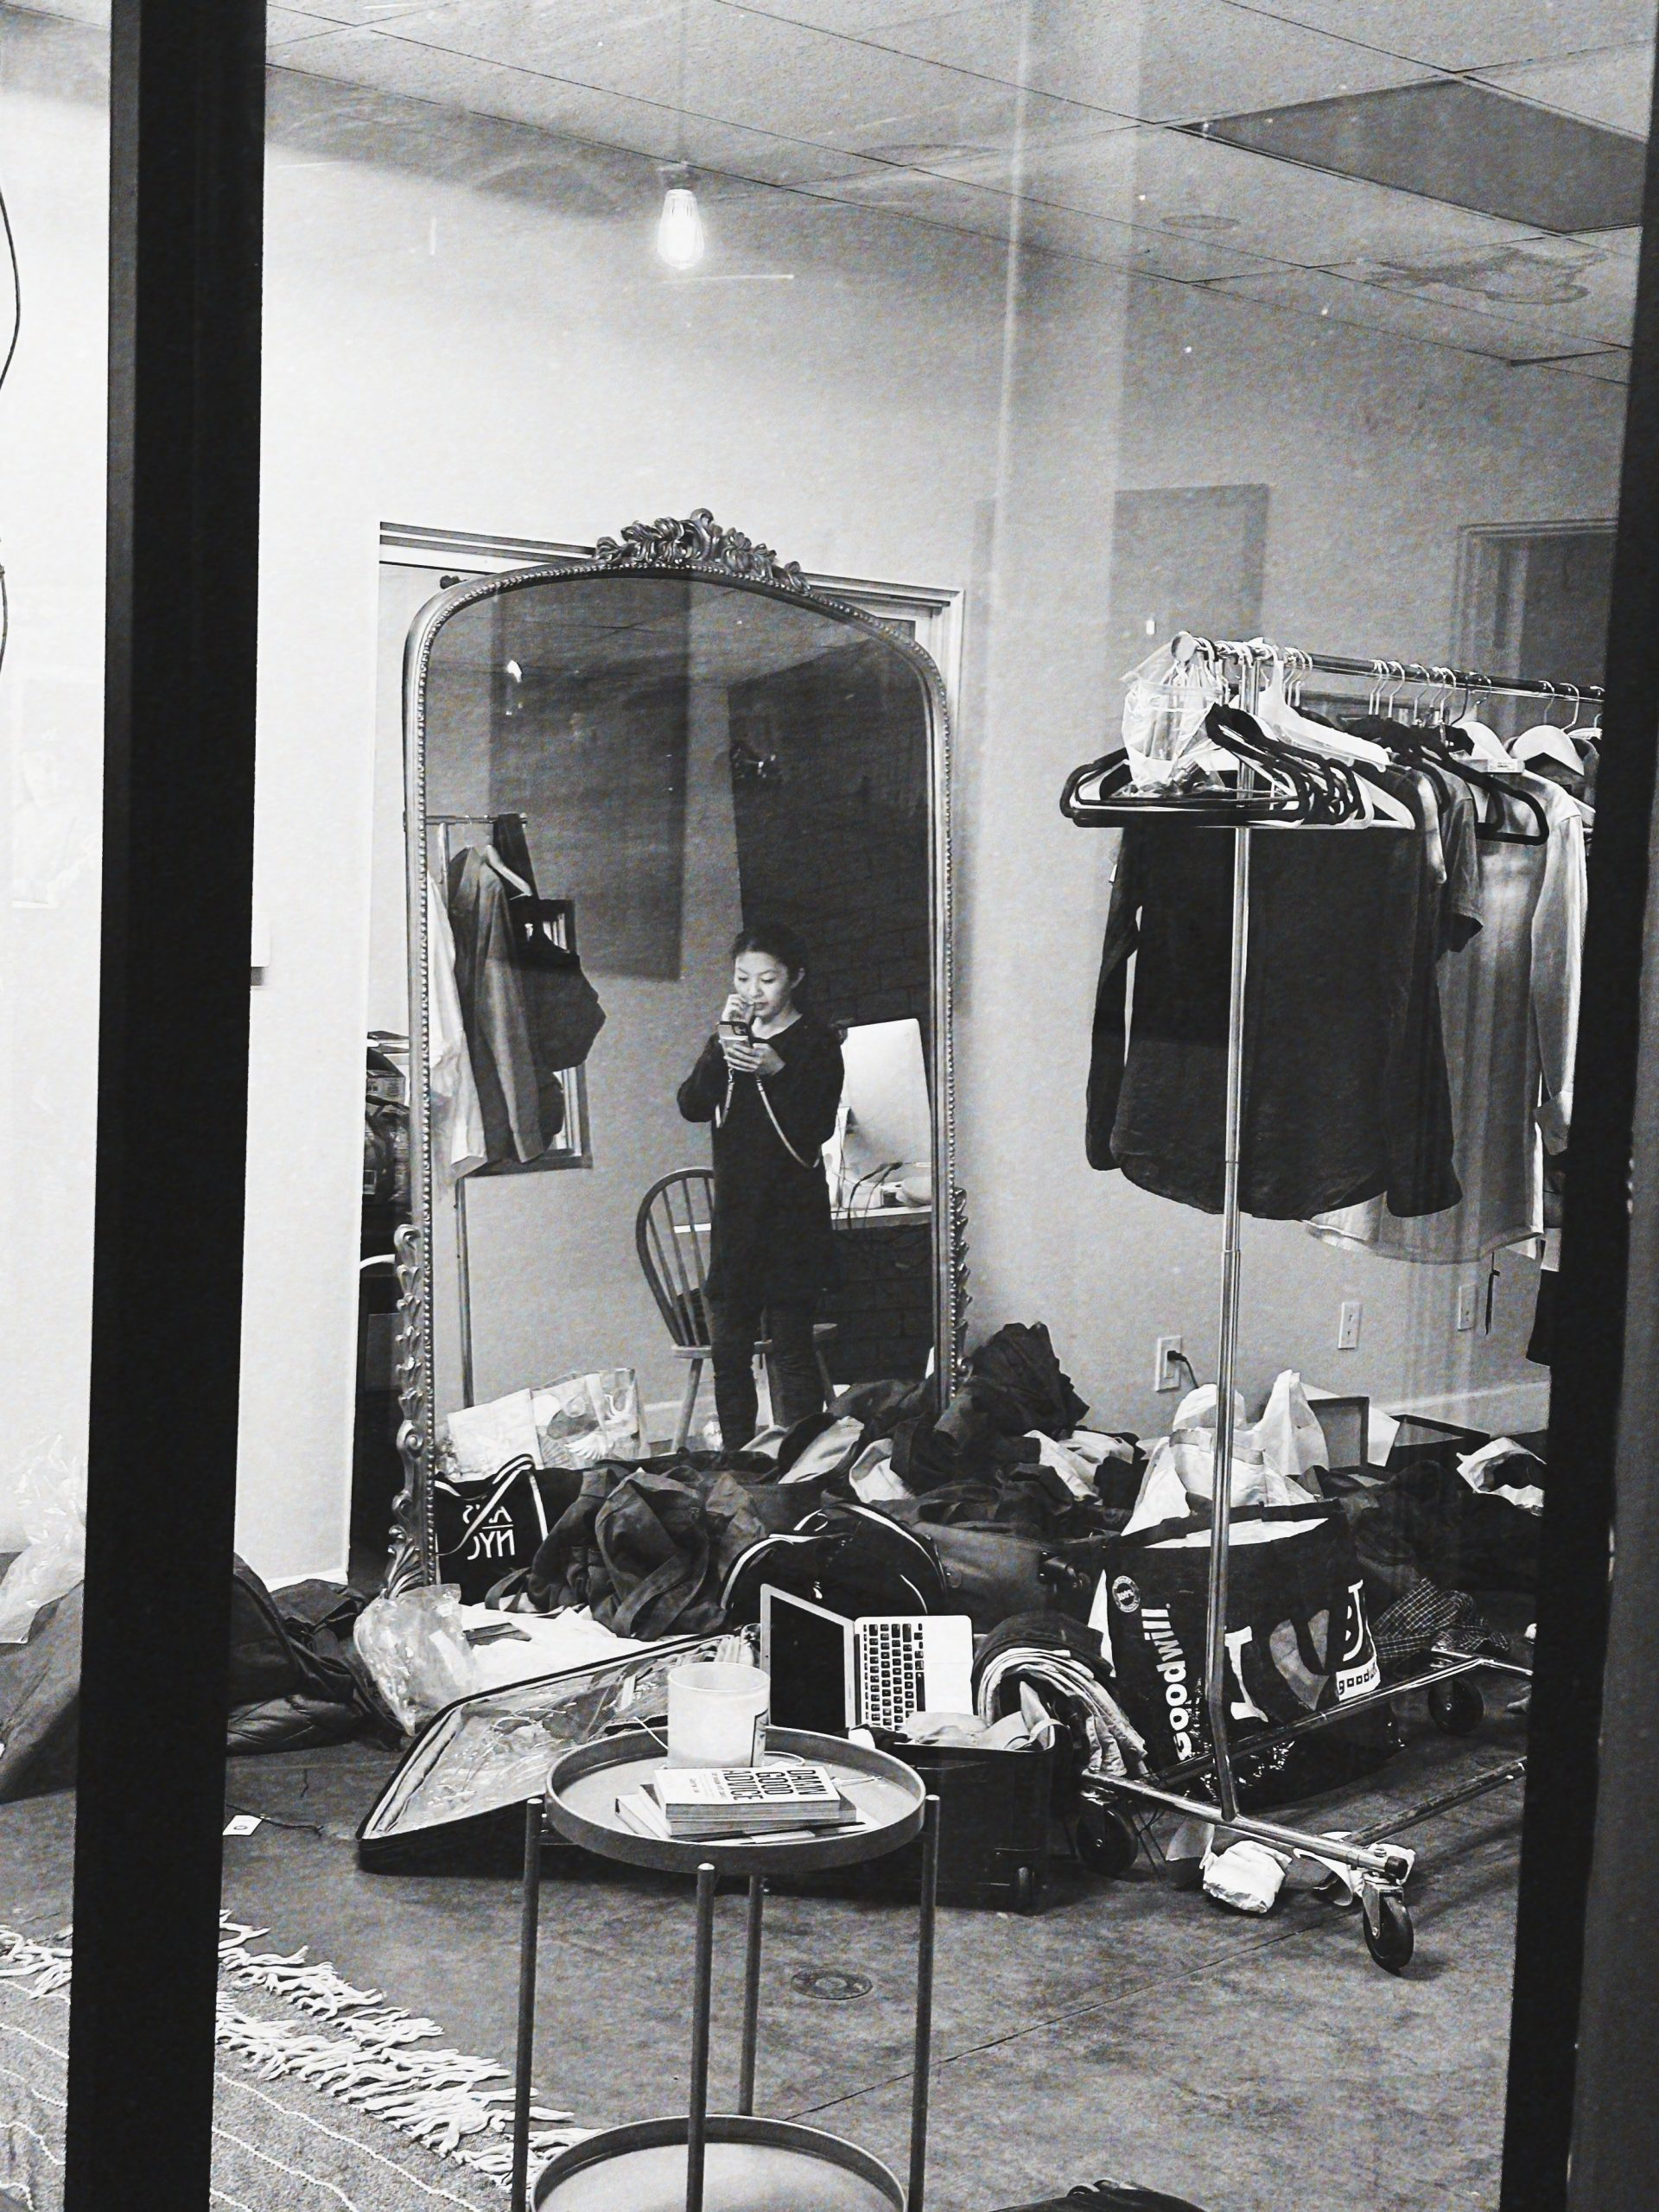 IU Black and white of Asian wardrobe film crew member organizing clothing items in wardrobe room for The American Film